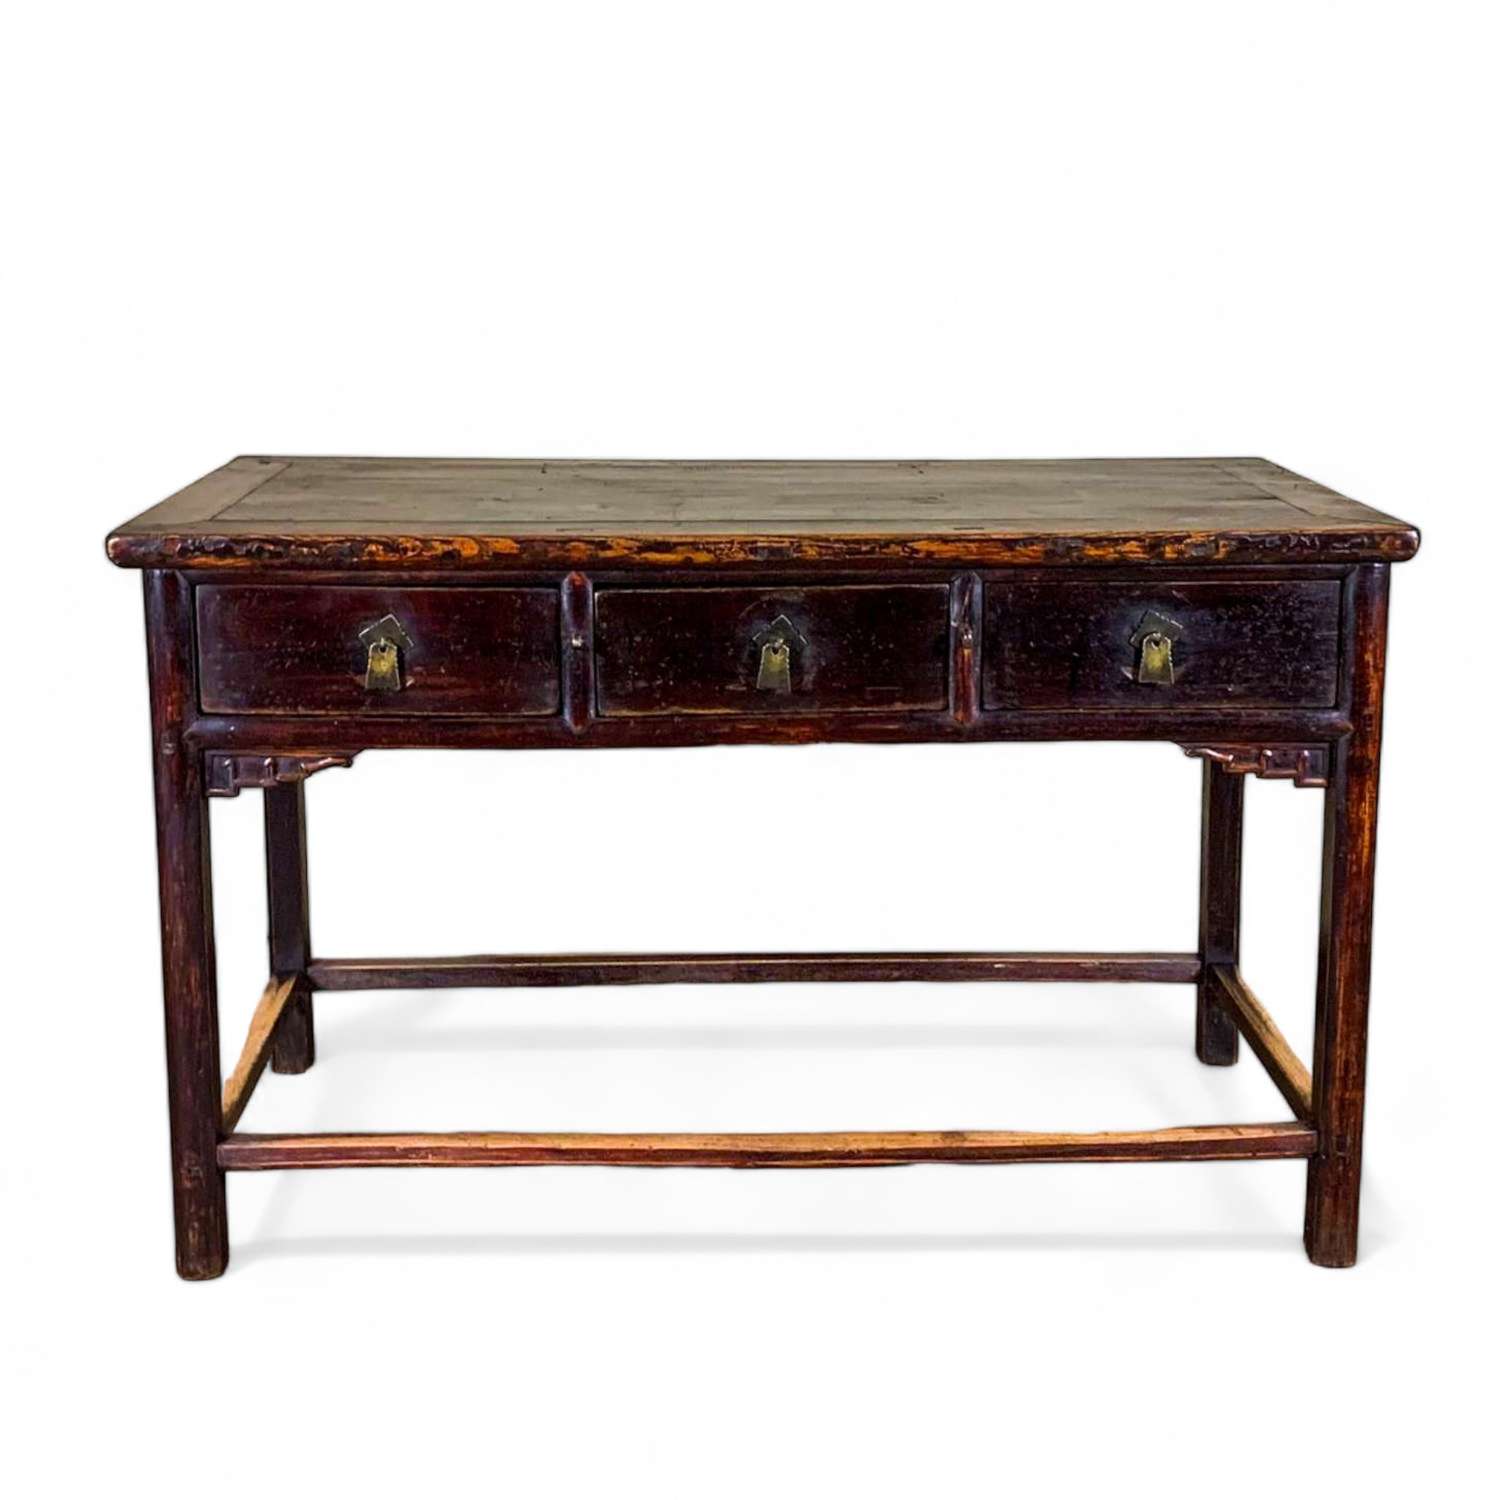 Early 19th Century c. 1850 Chinese Elm 3 Drawer Scroll Table/Console